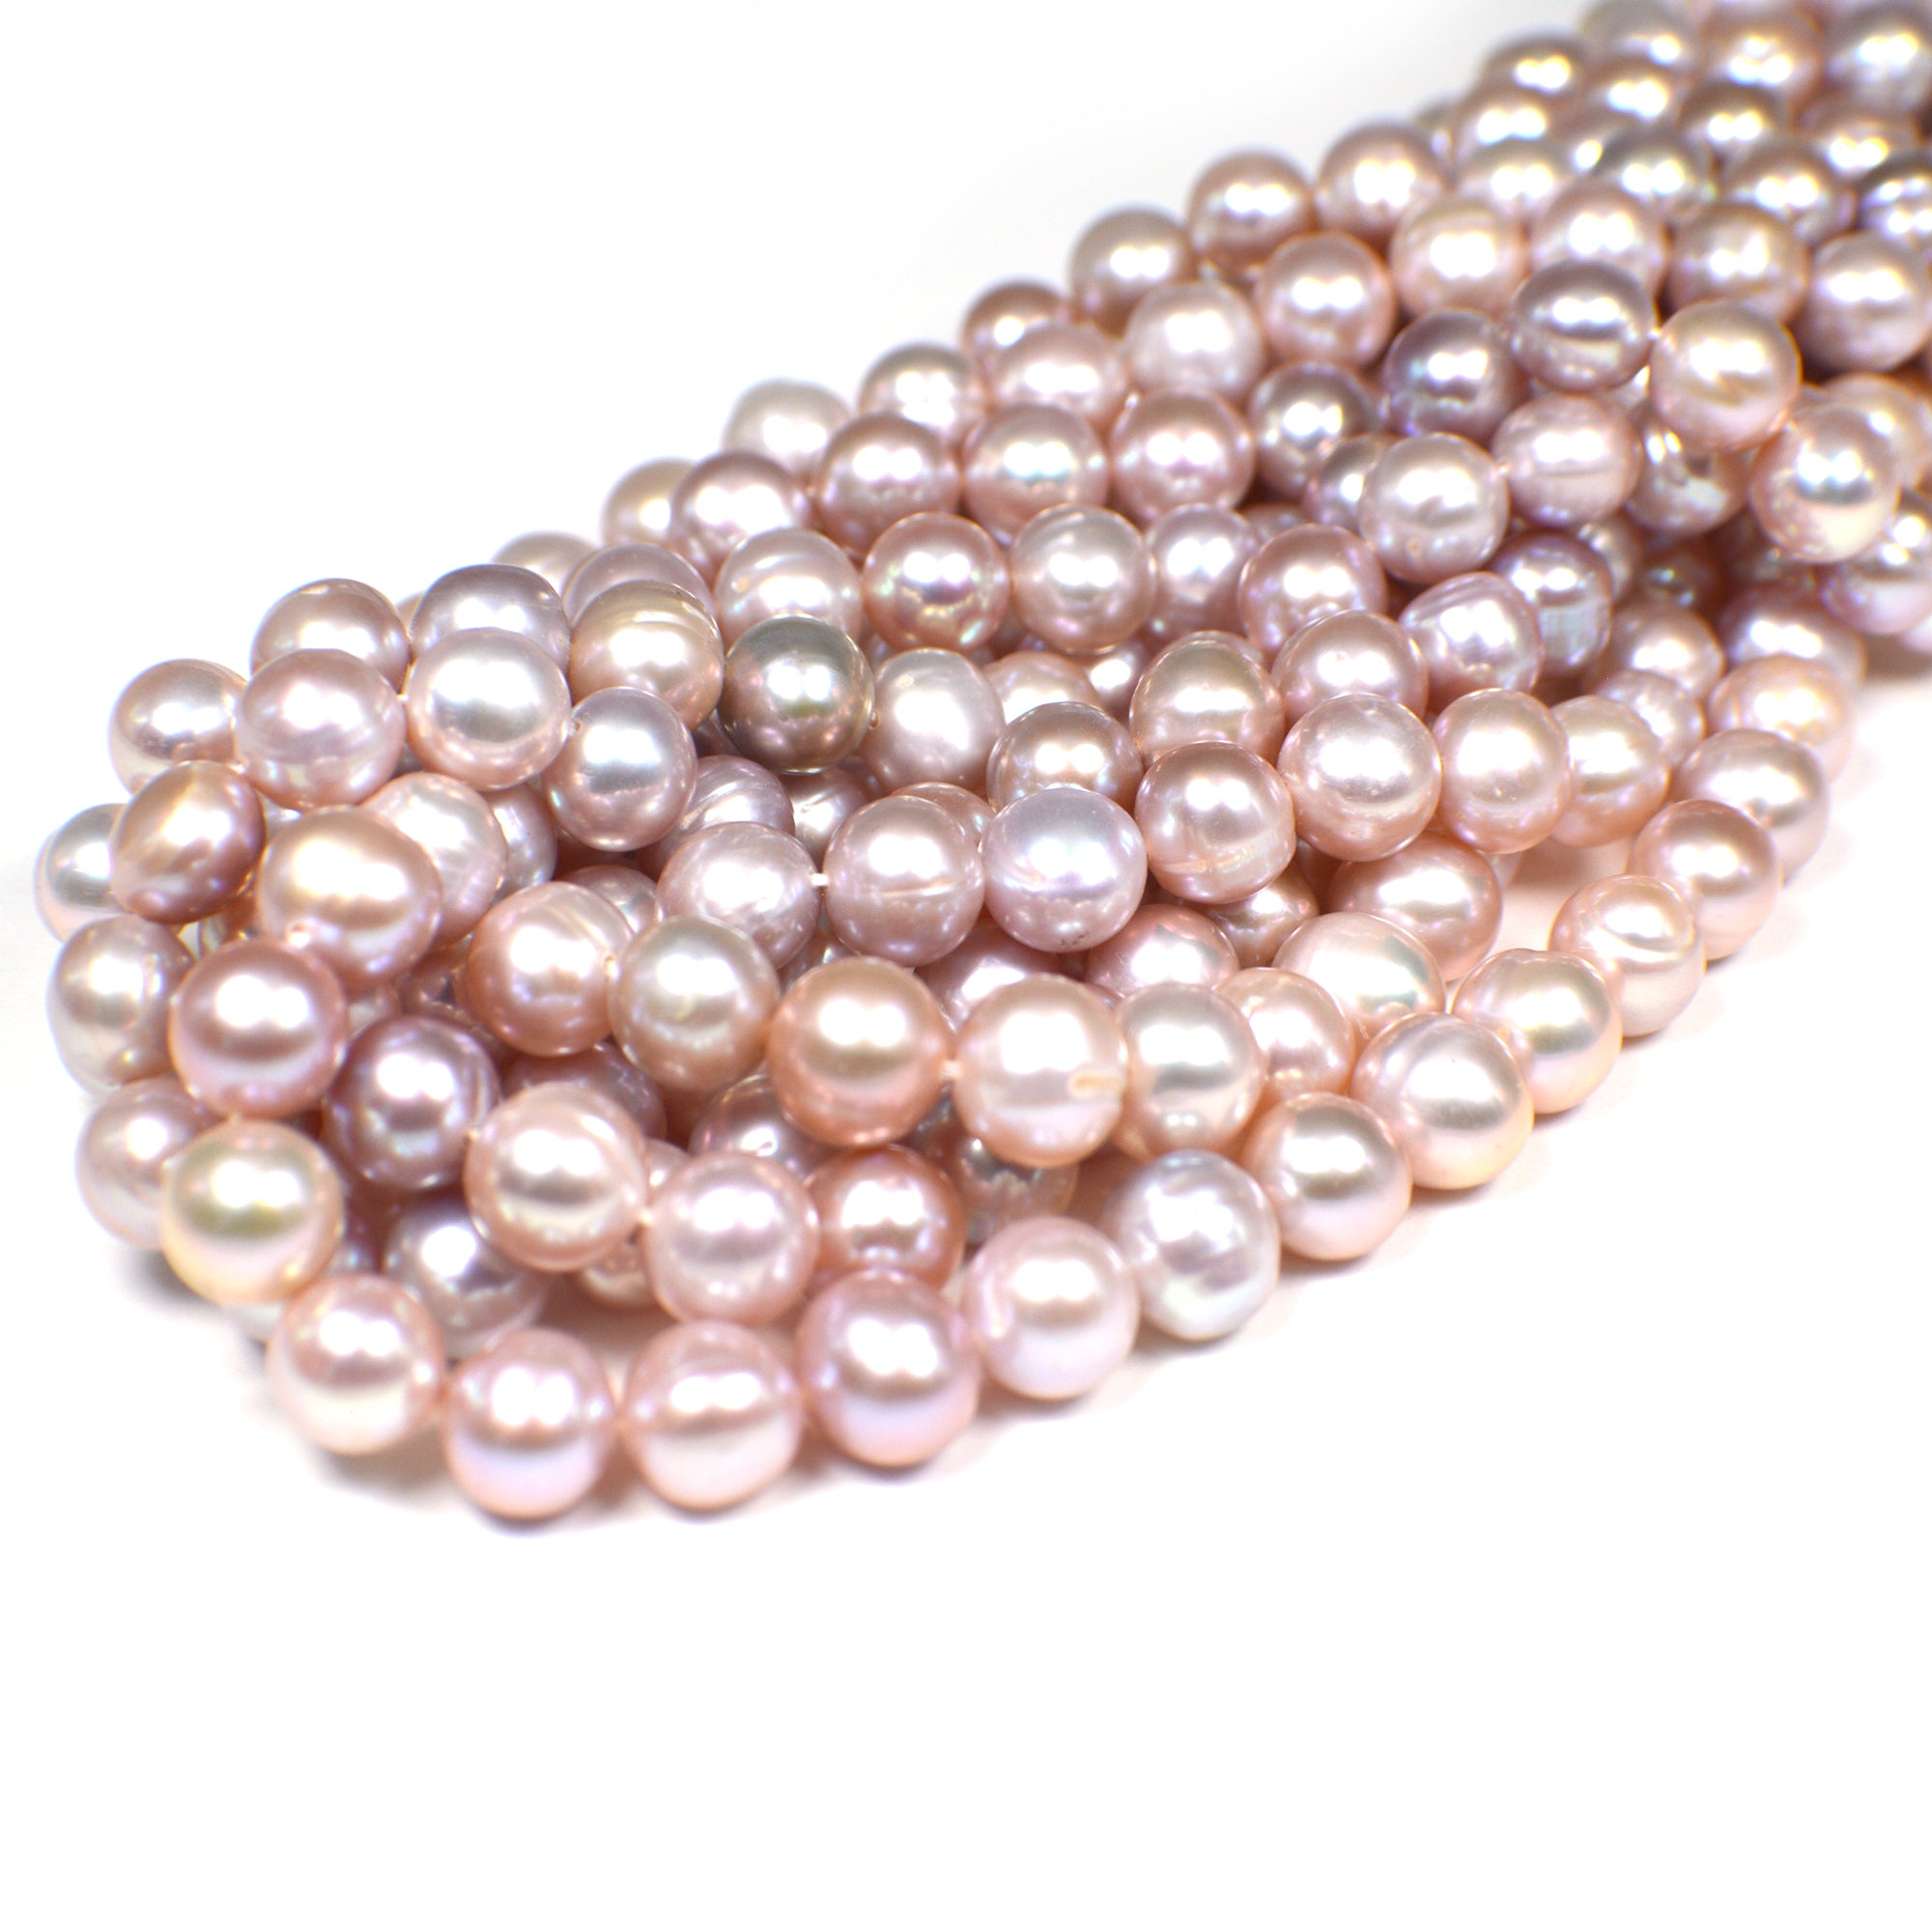 7 - 8 MM Lilac Near Round Freshwater Pearls Beads